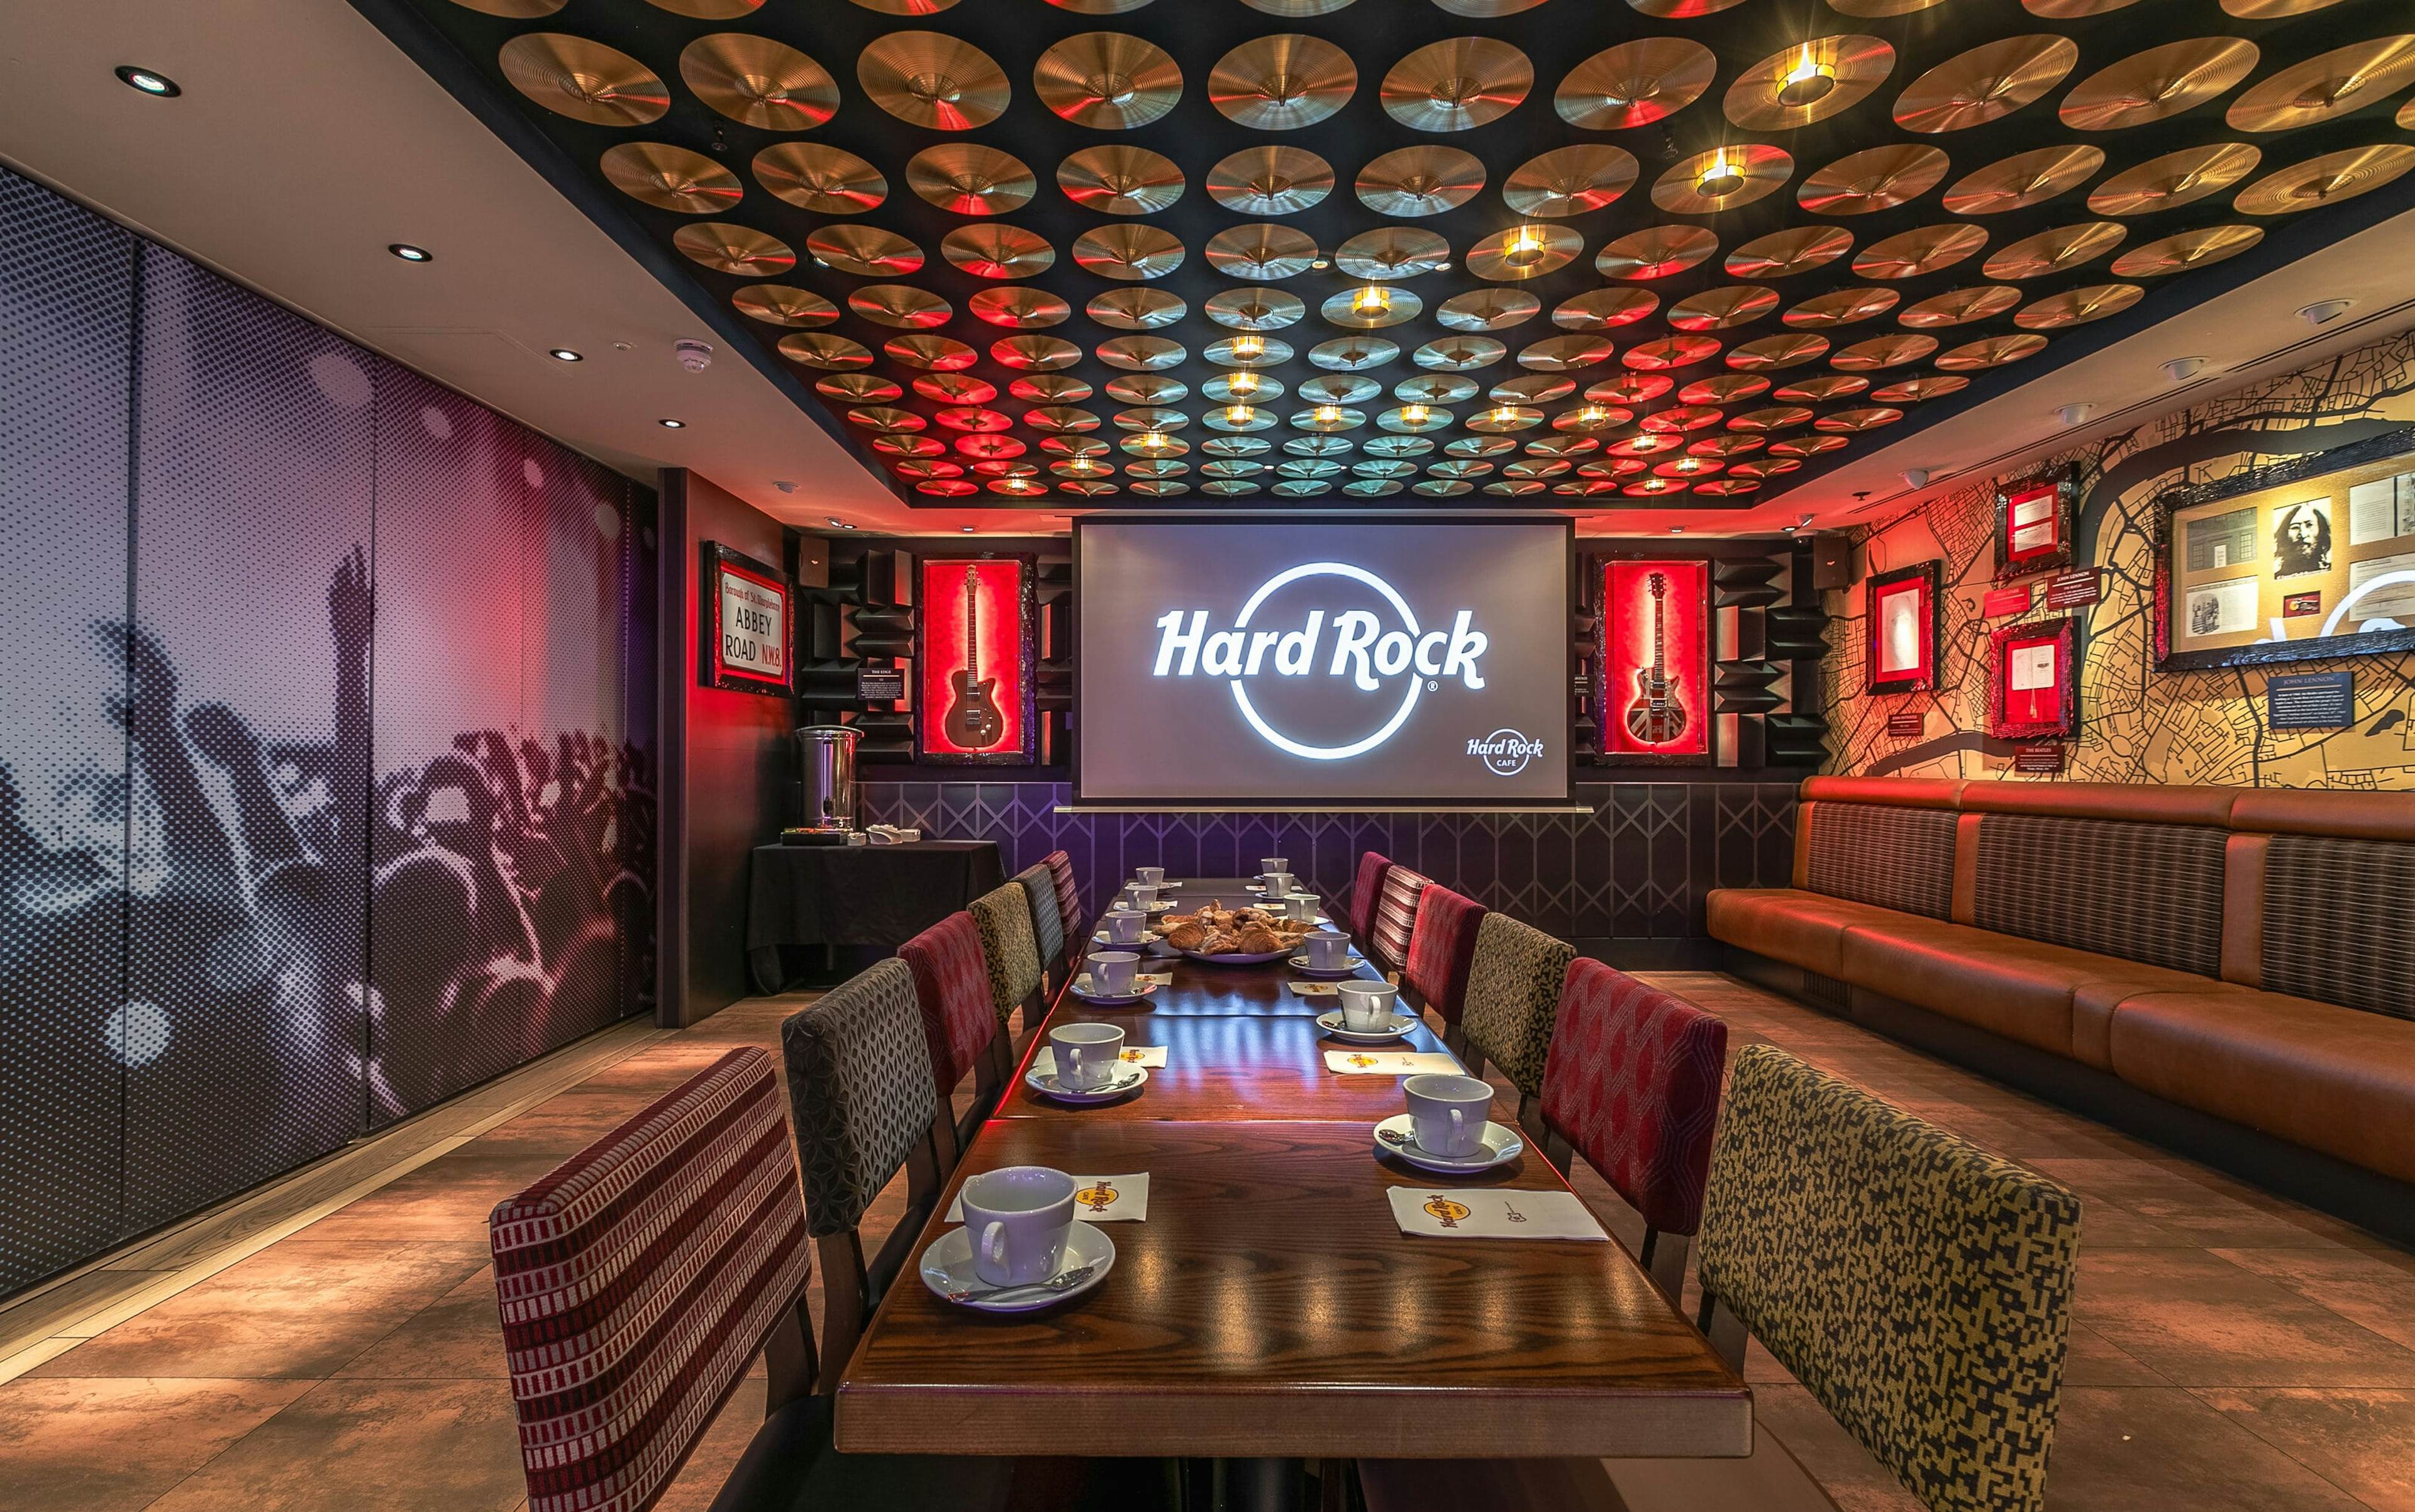 Hard Rock Cafe Piccadilly Circus - image 1